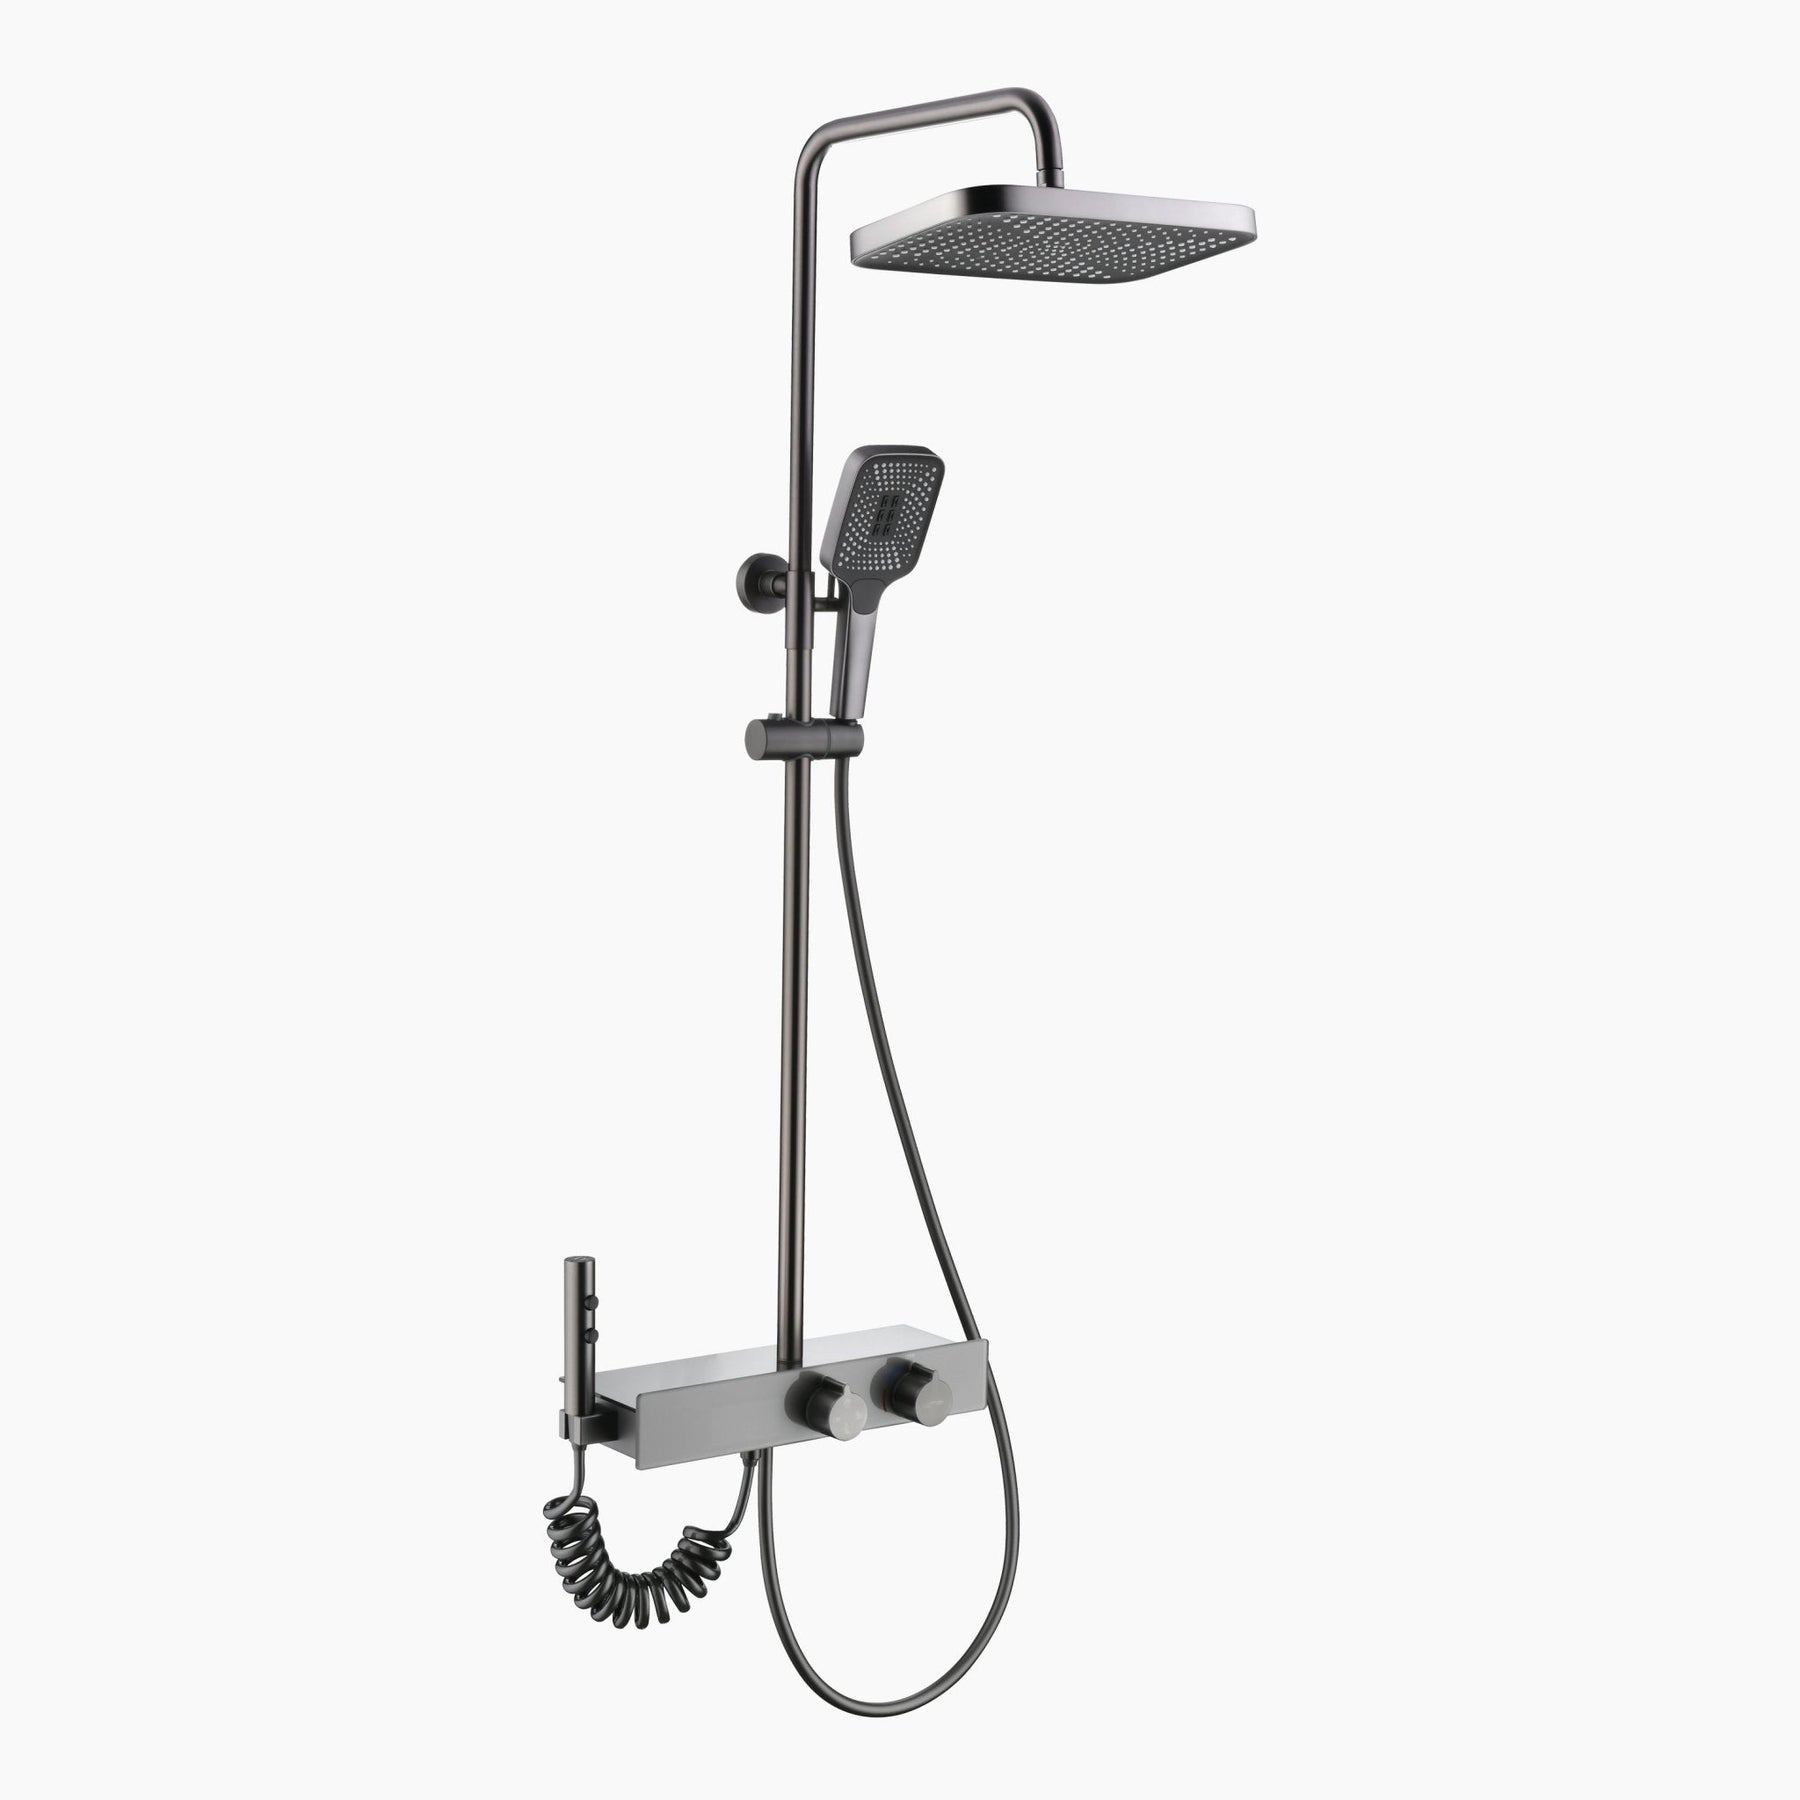 Advanced Thermostatic Shower System with 4 Mode Water Outlet Options